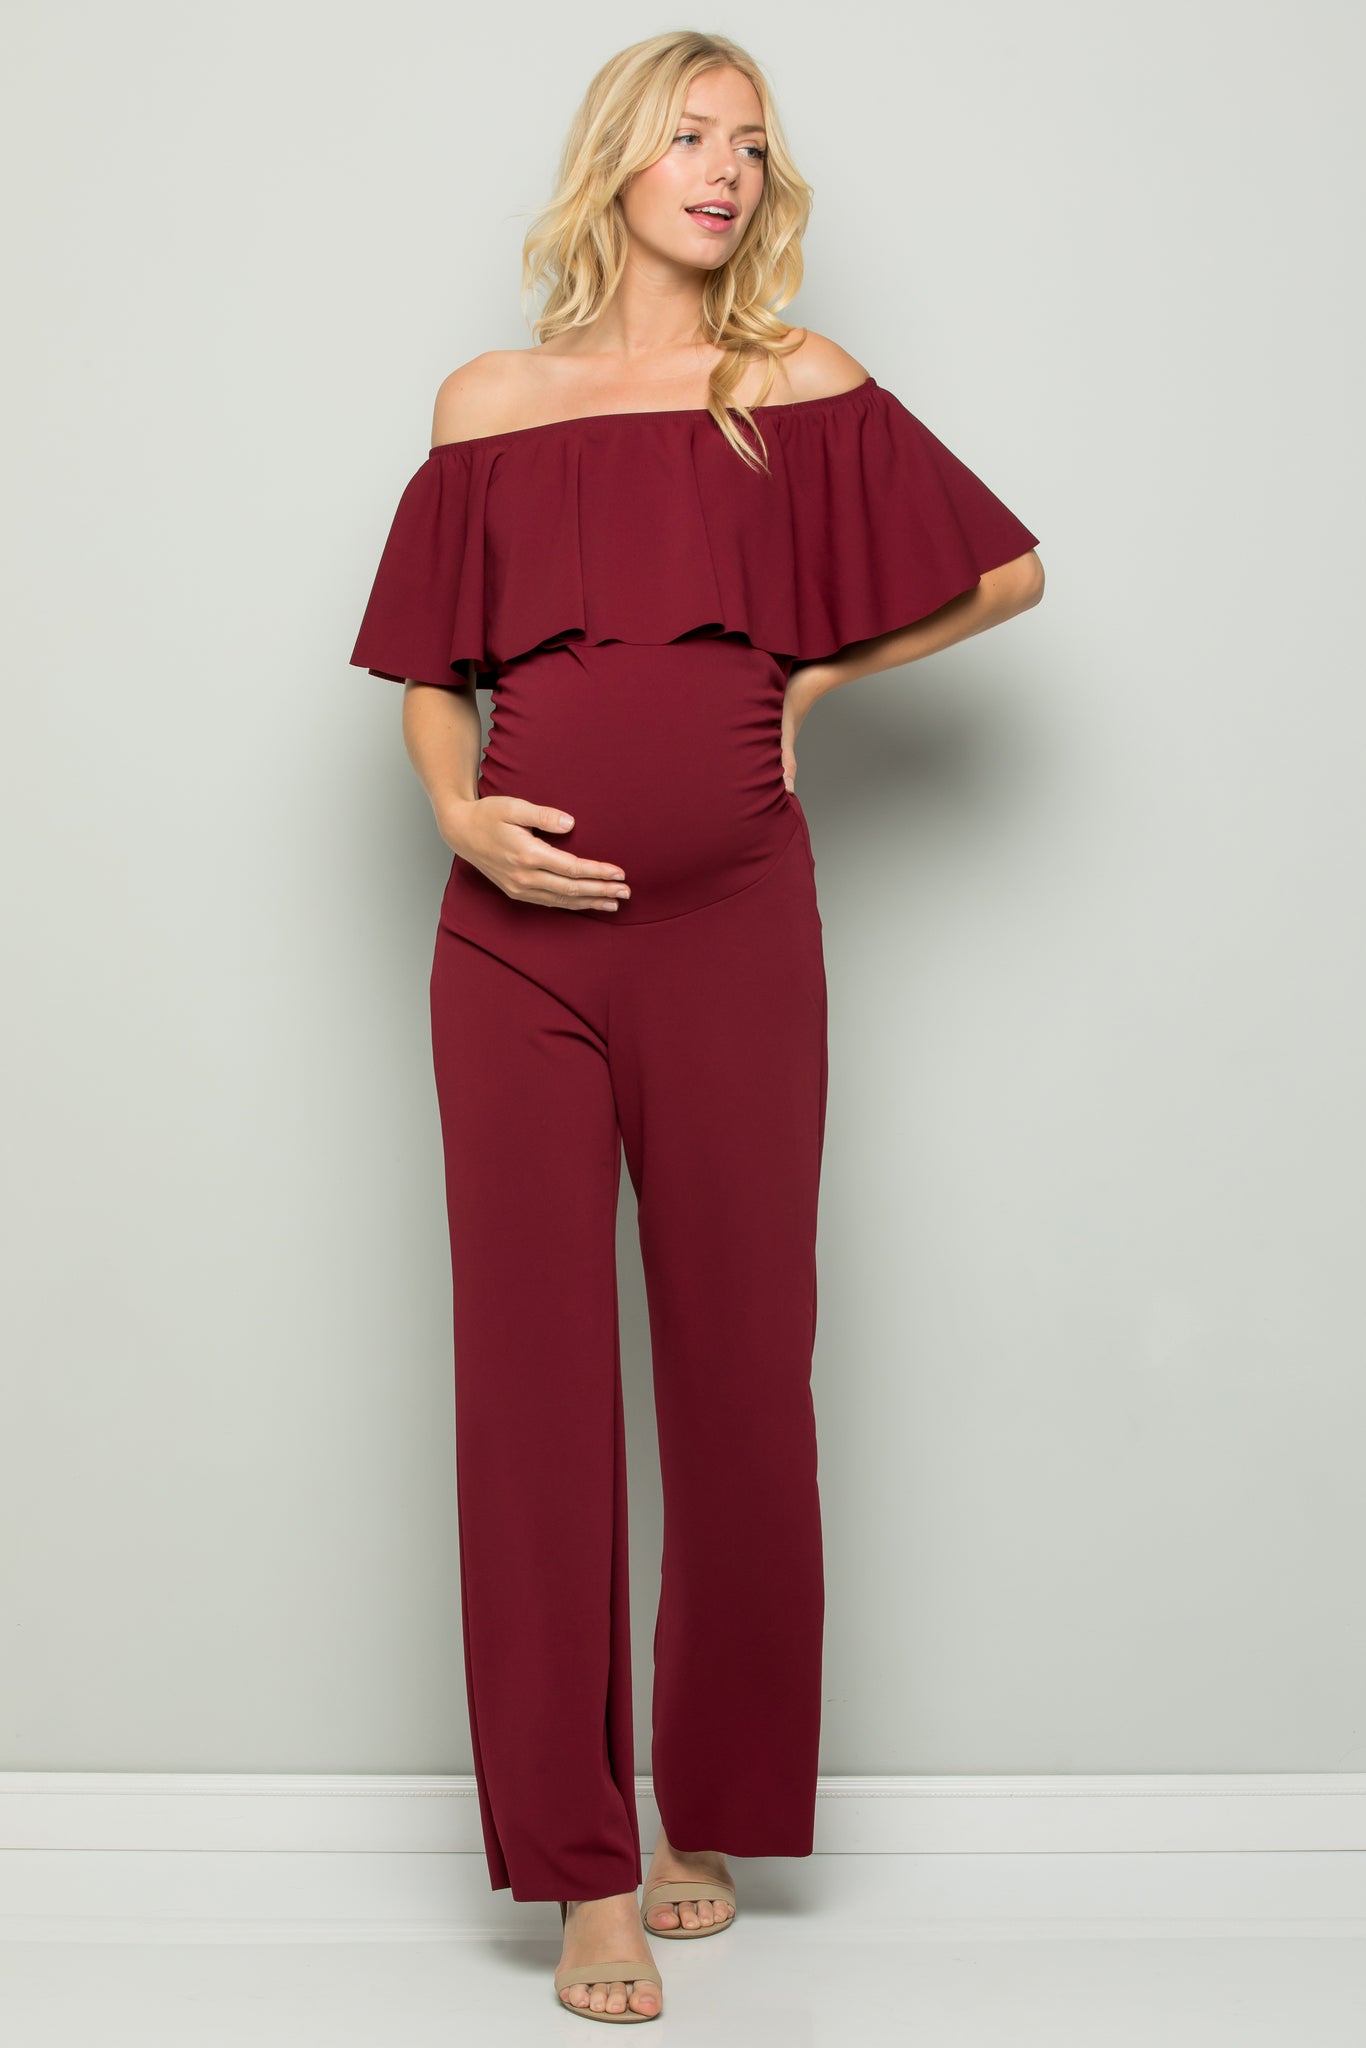 Buy Ilha High Waist Maternity Pants Online | The Mommy Collective